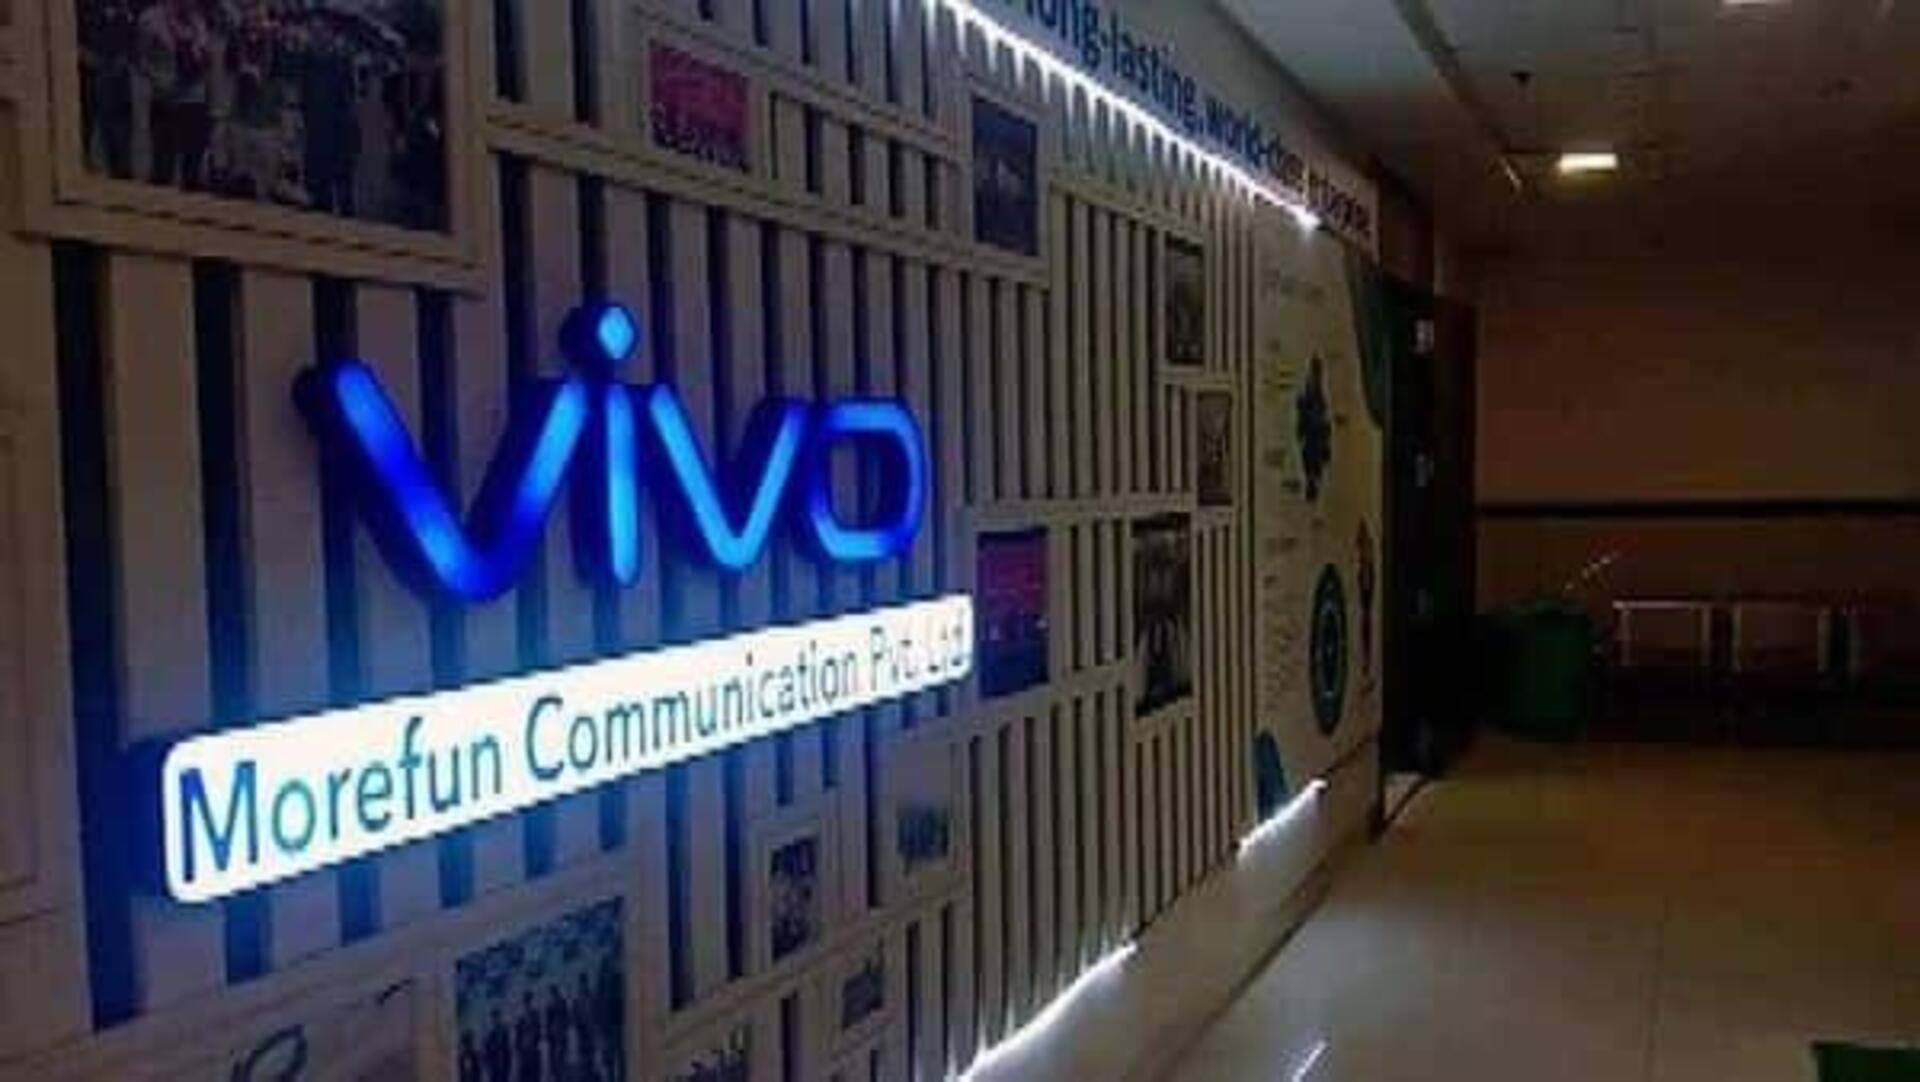 ED is investigating Vivo for visa violations and money laundering